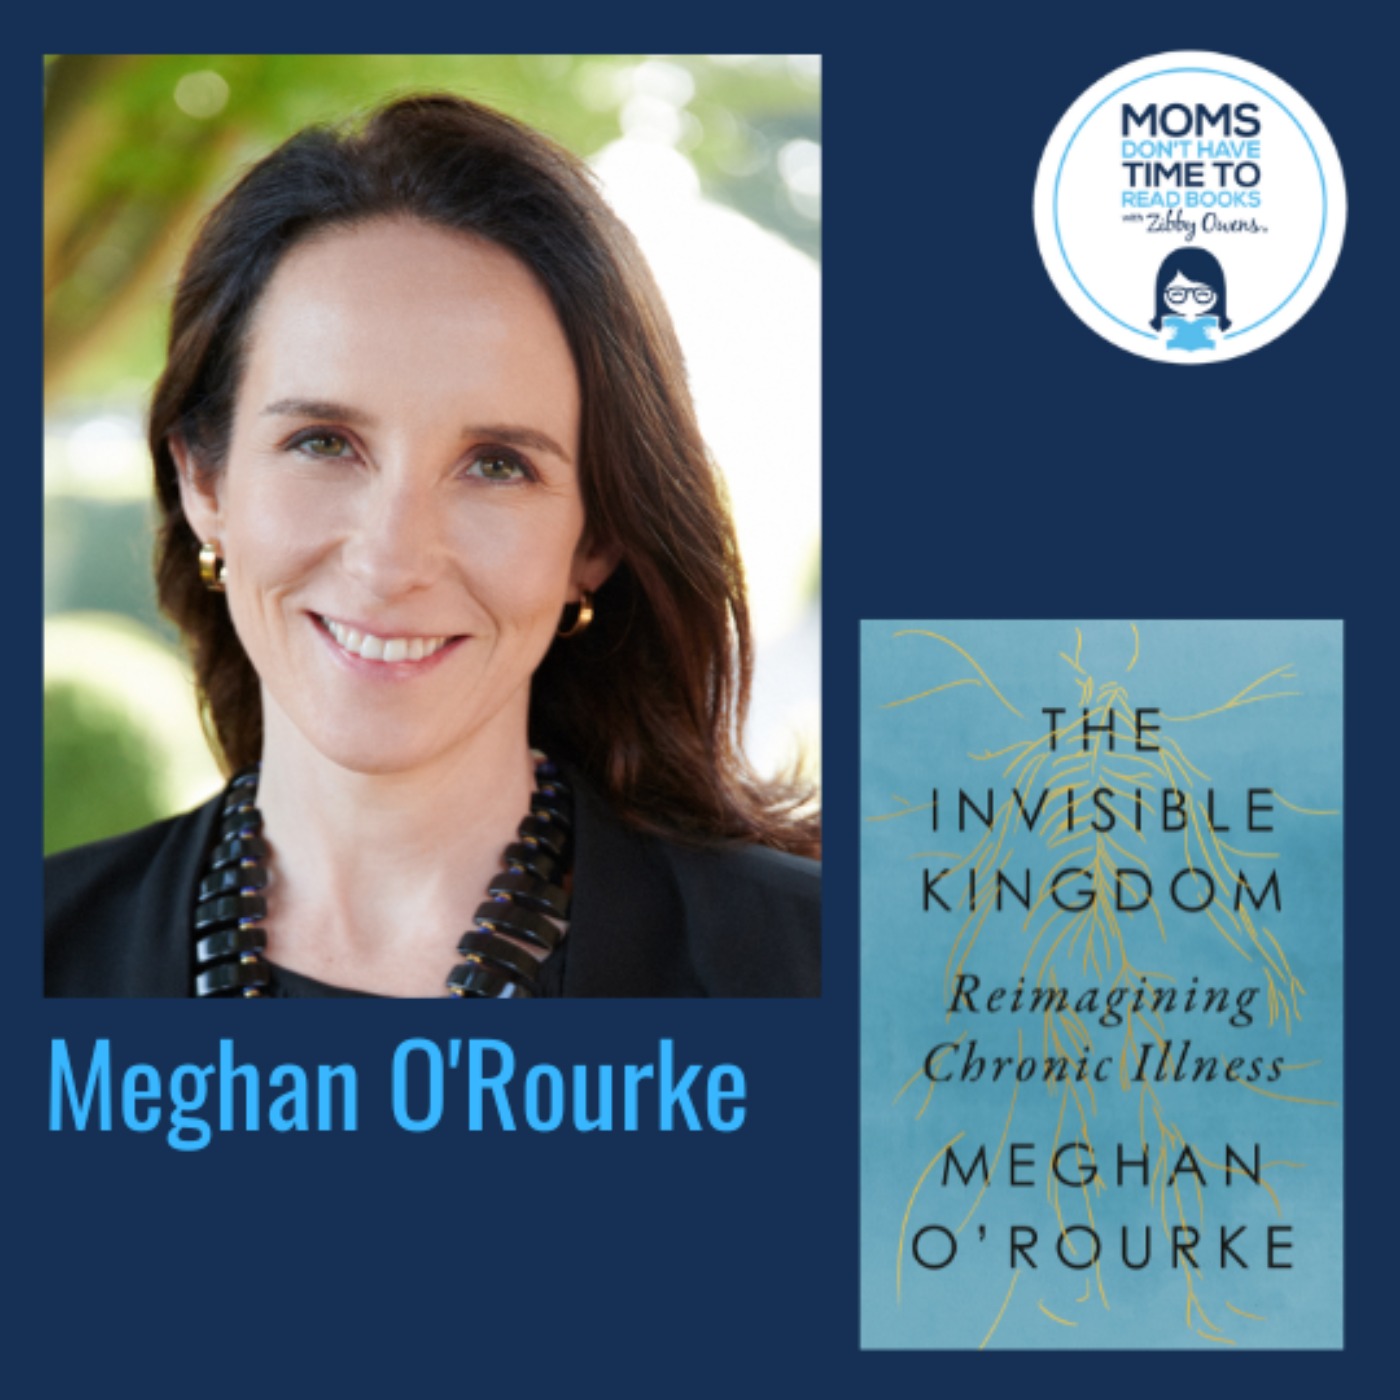 Meghan O'Rourke, THE INVISIBLE KINGDOM: Reimagining Chronic Illness